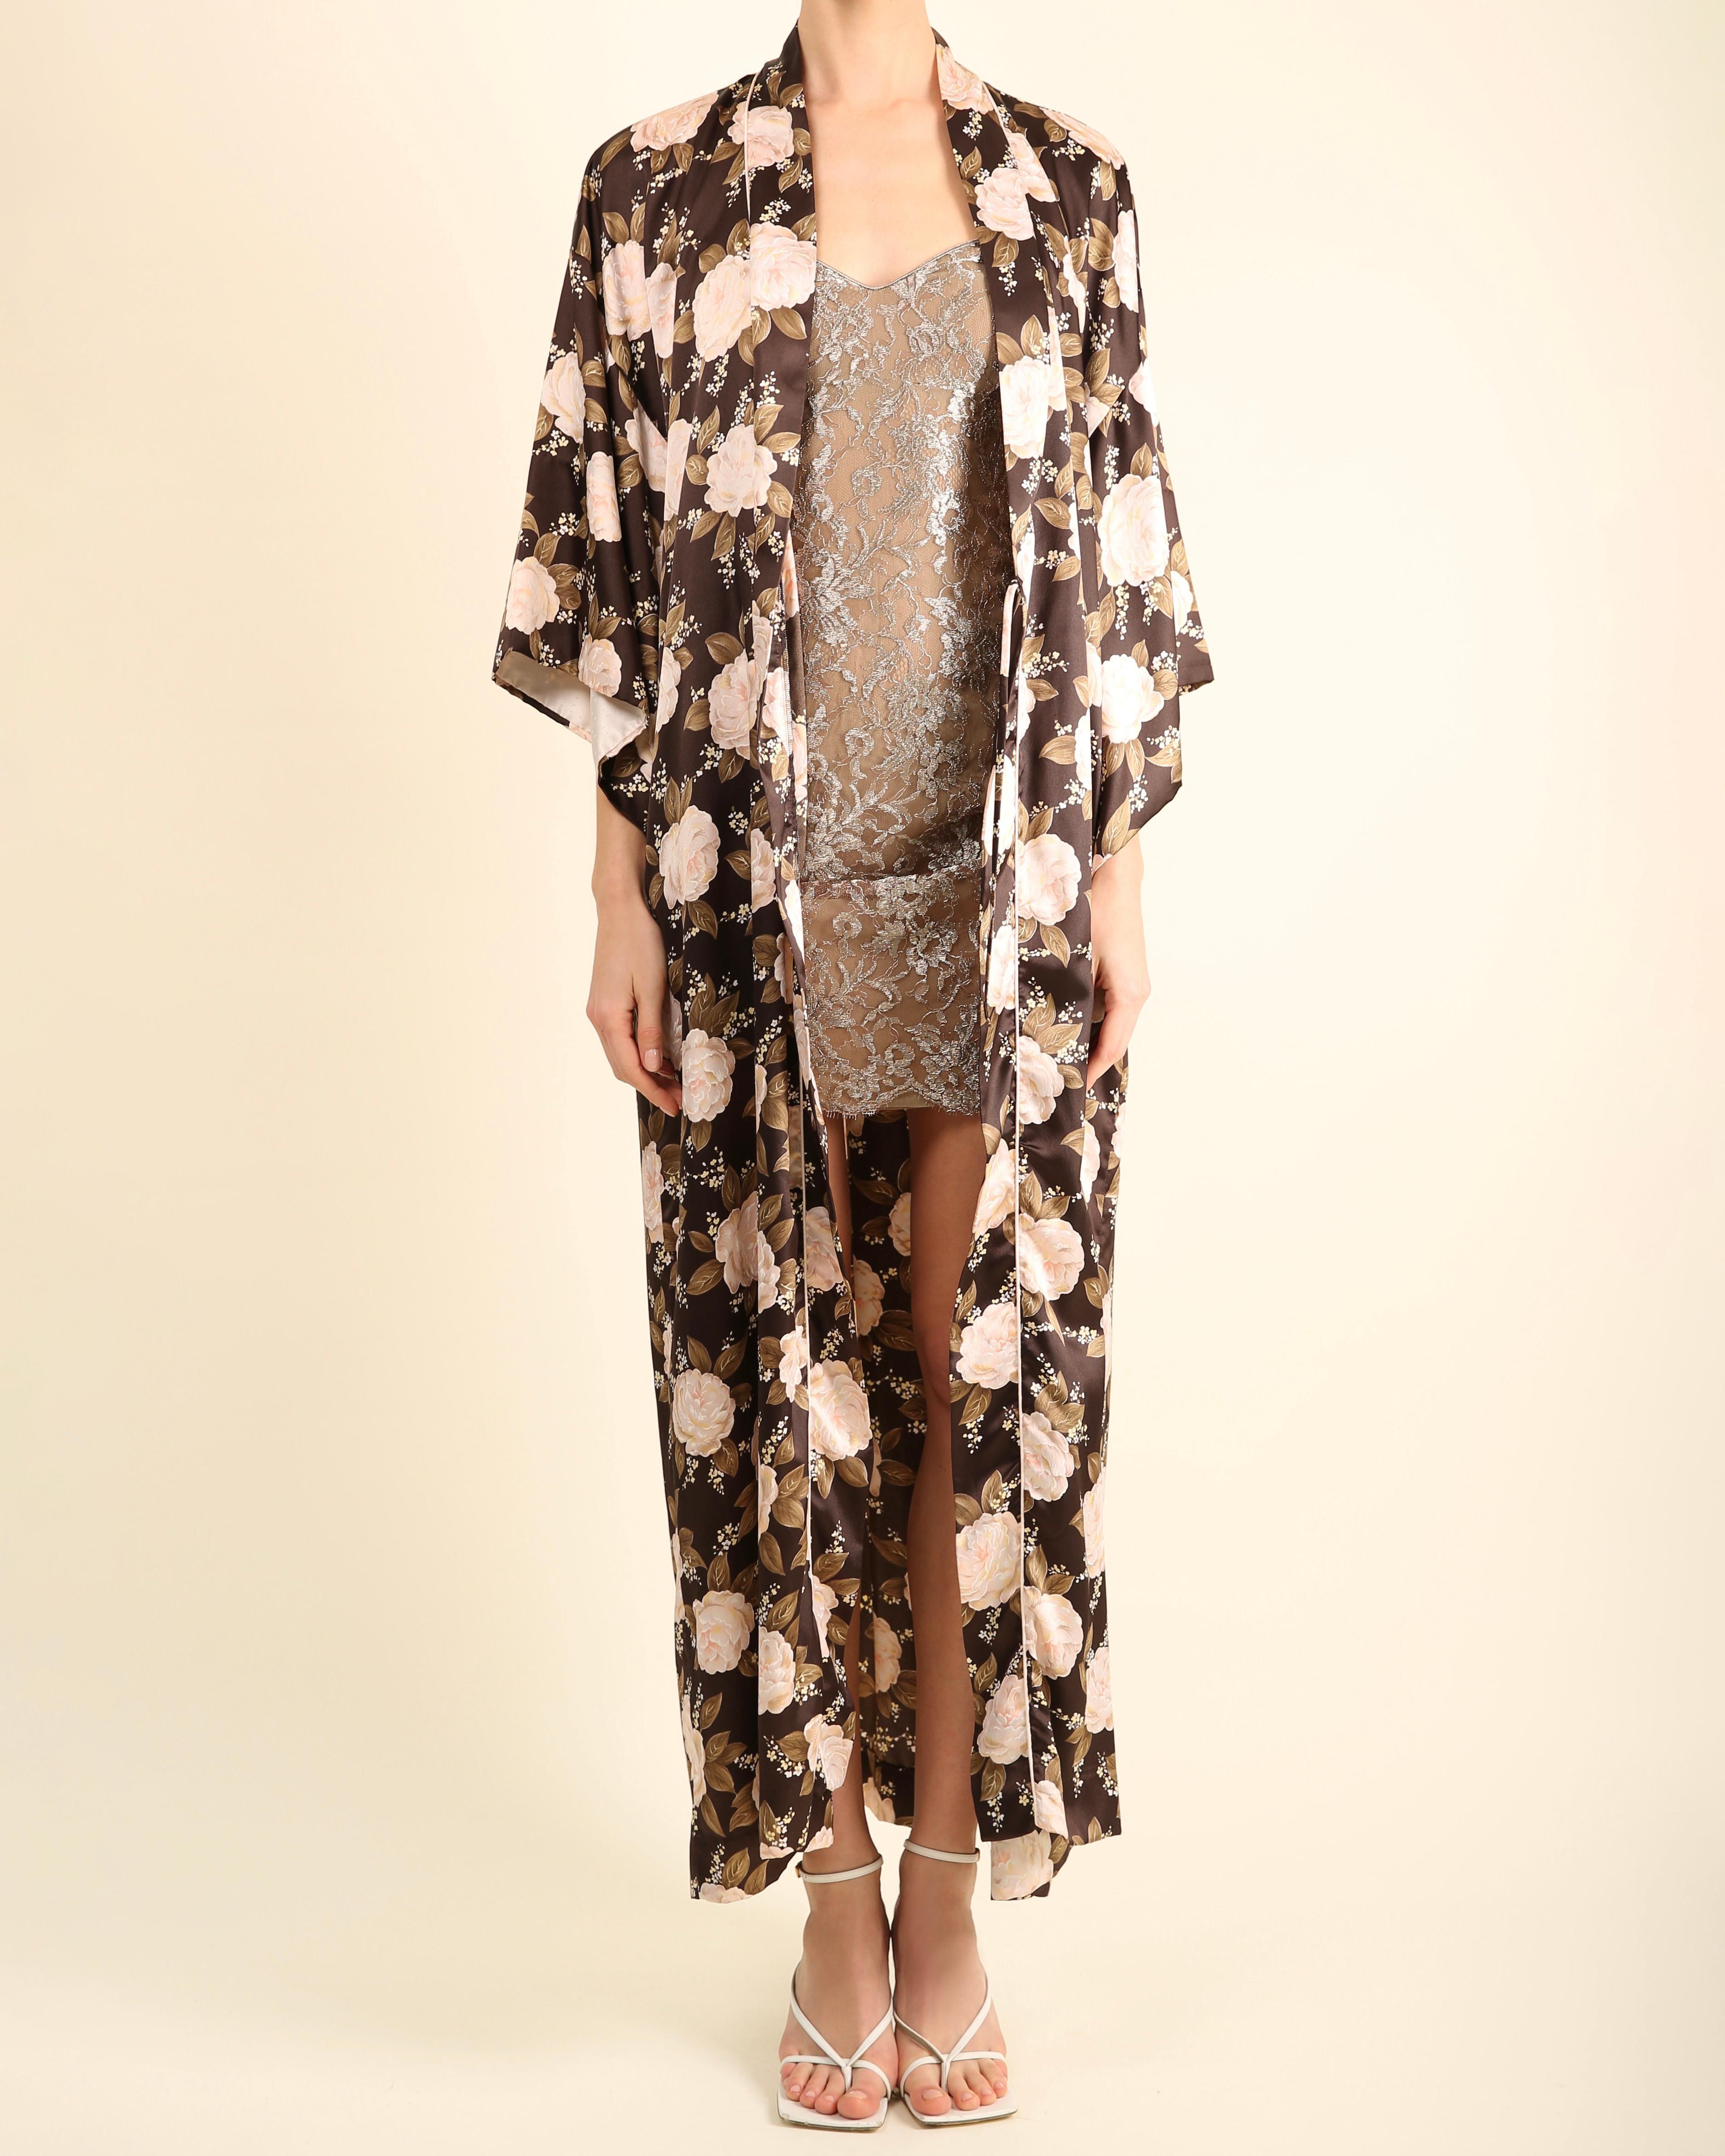 LOVE LALI Vintage

An absolutely beautiful vintage kimono robe from Christian Dior that can easily be worn as an over coat over a dress in an evening.
Dark brown with pink, yellow and green floral print.
Features kimono sleeves, an oversized cut,